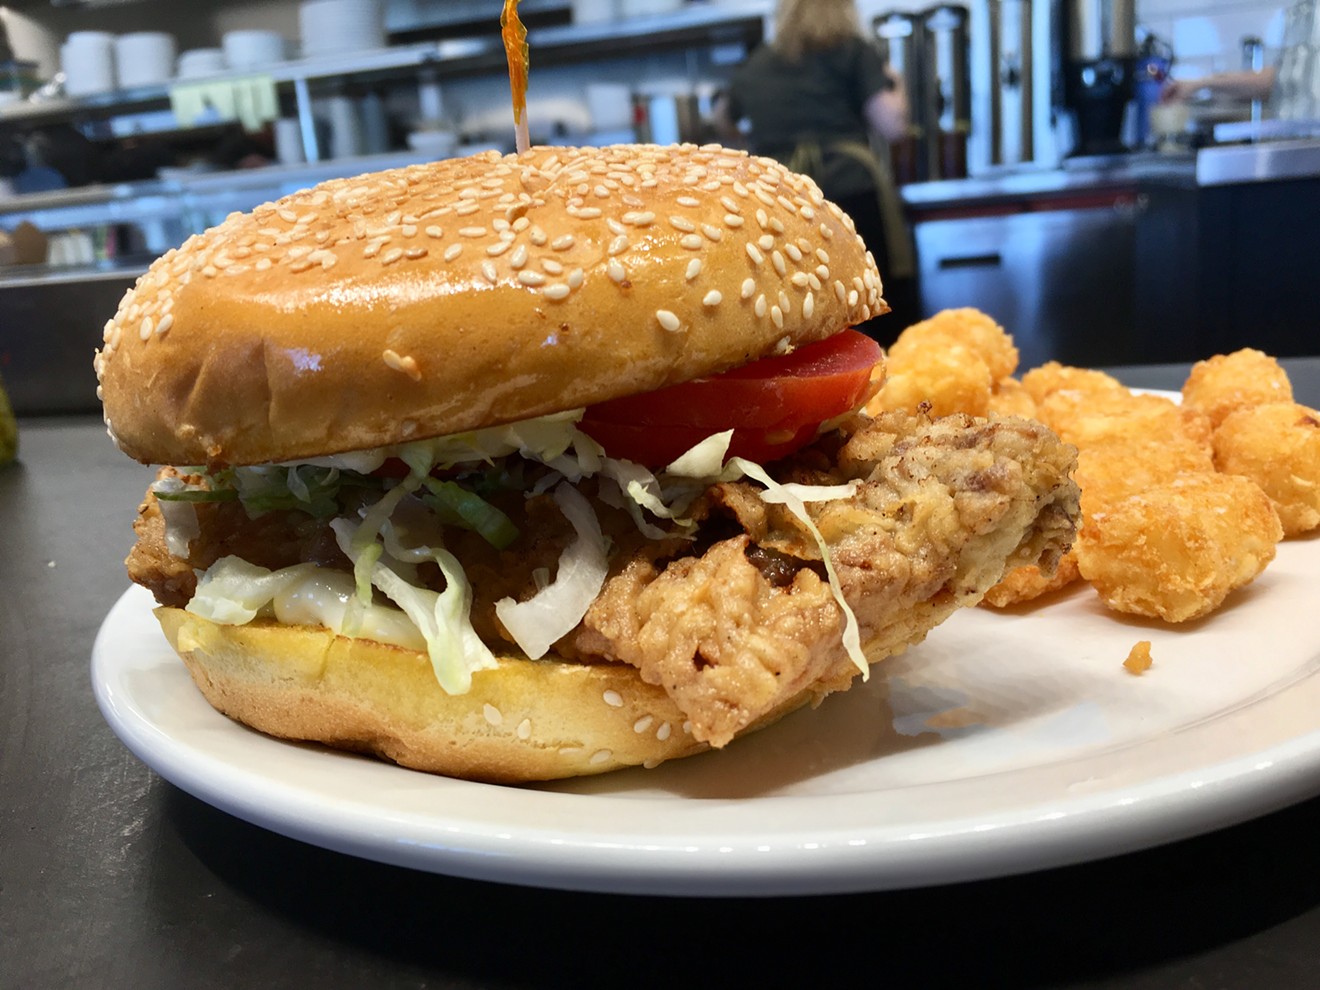 The chicken-fried steak sandwich, with shredded lettuce and tomatoes on a buttered sesame seed bun, is $8.99 at Mockingbird Diner.